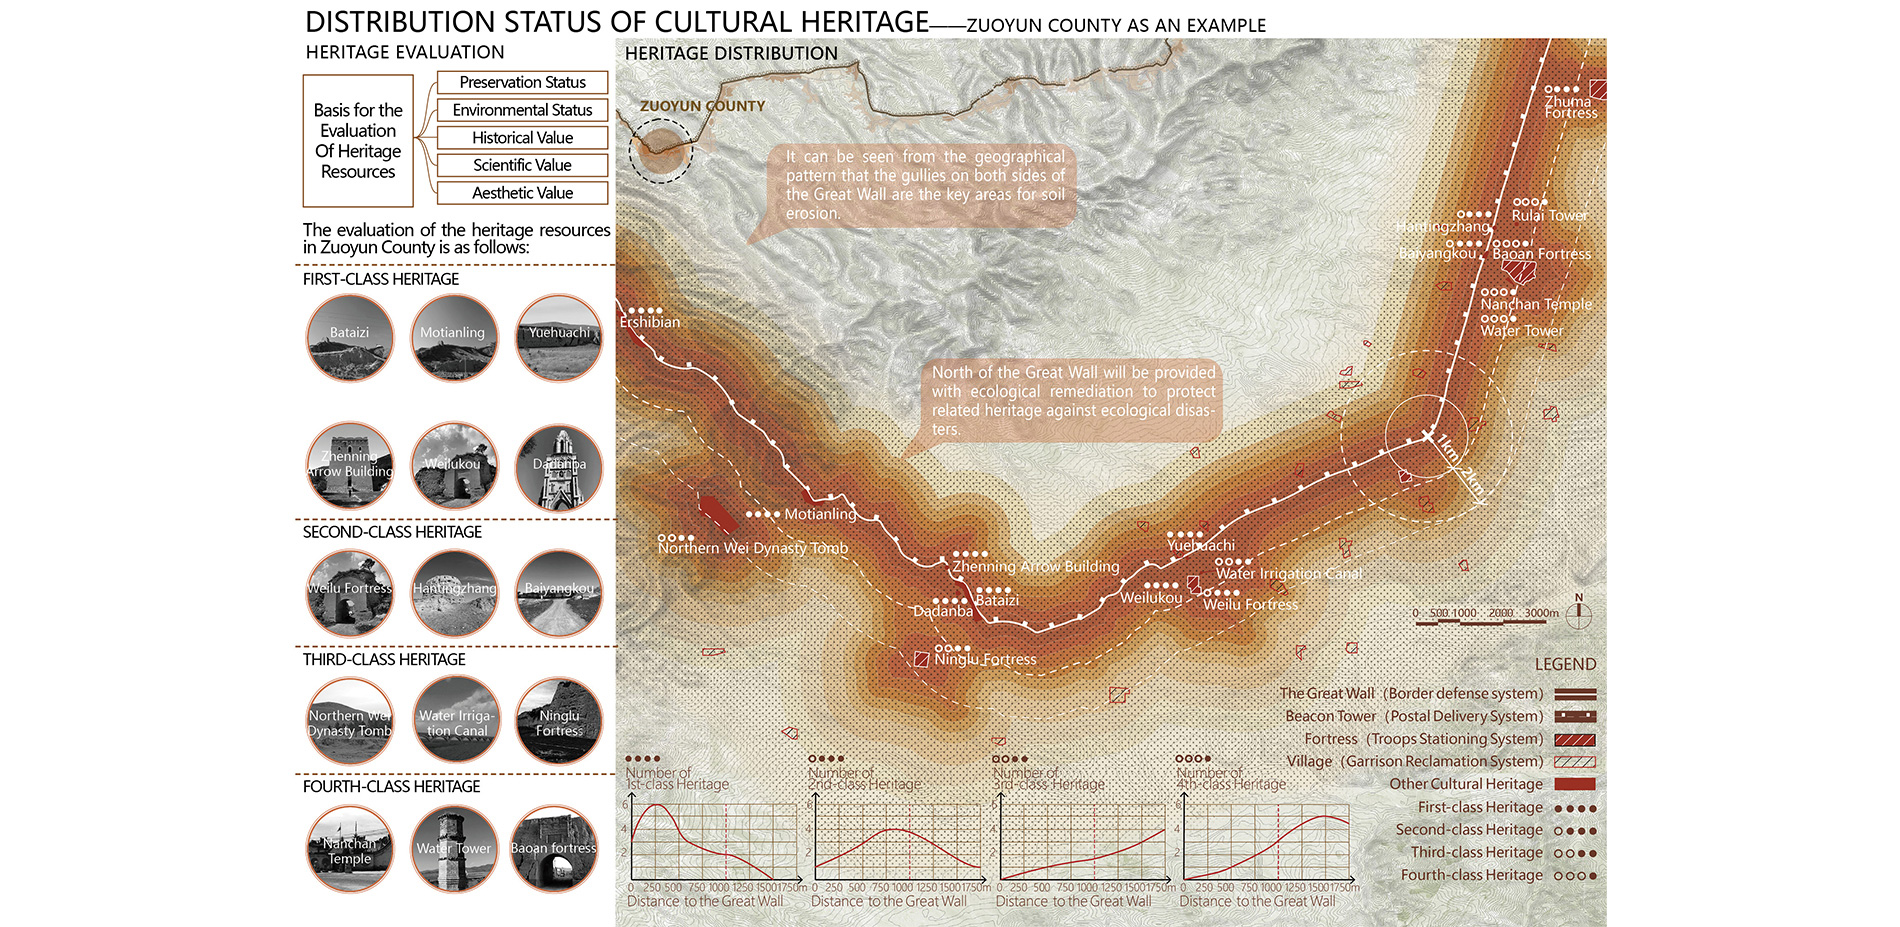 Distribution status of cultural heritage——Zuoyun county as an example 